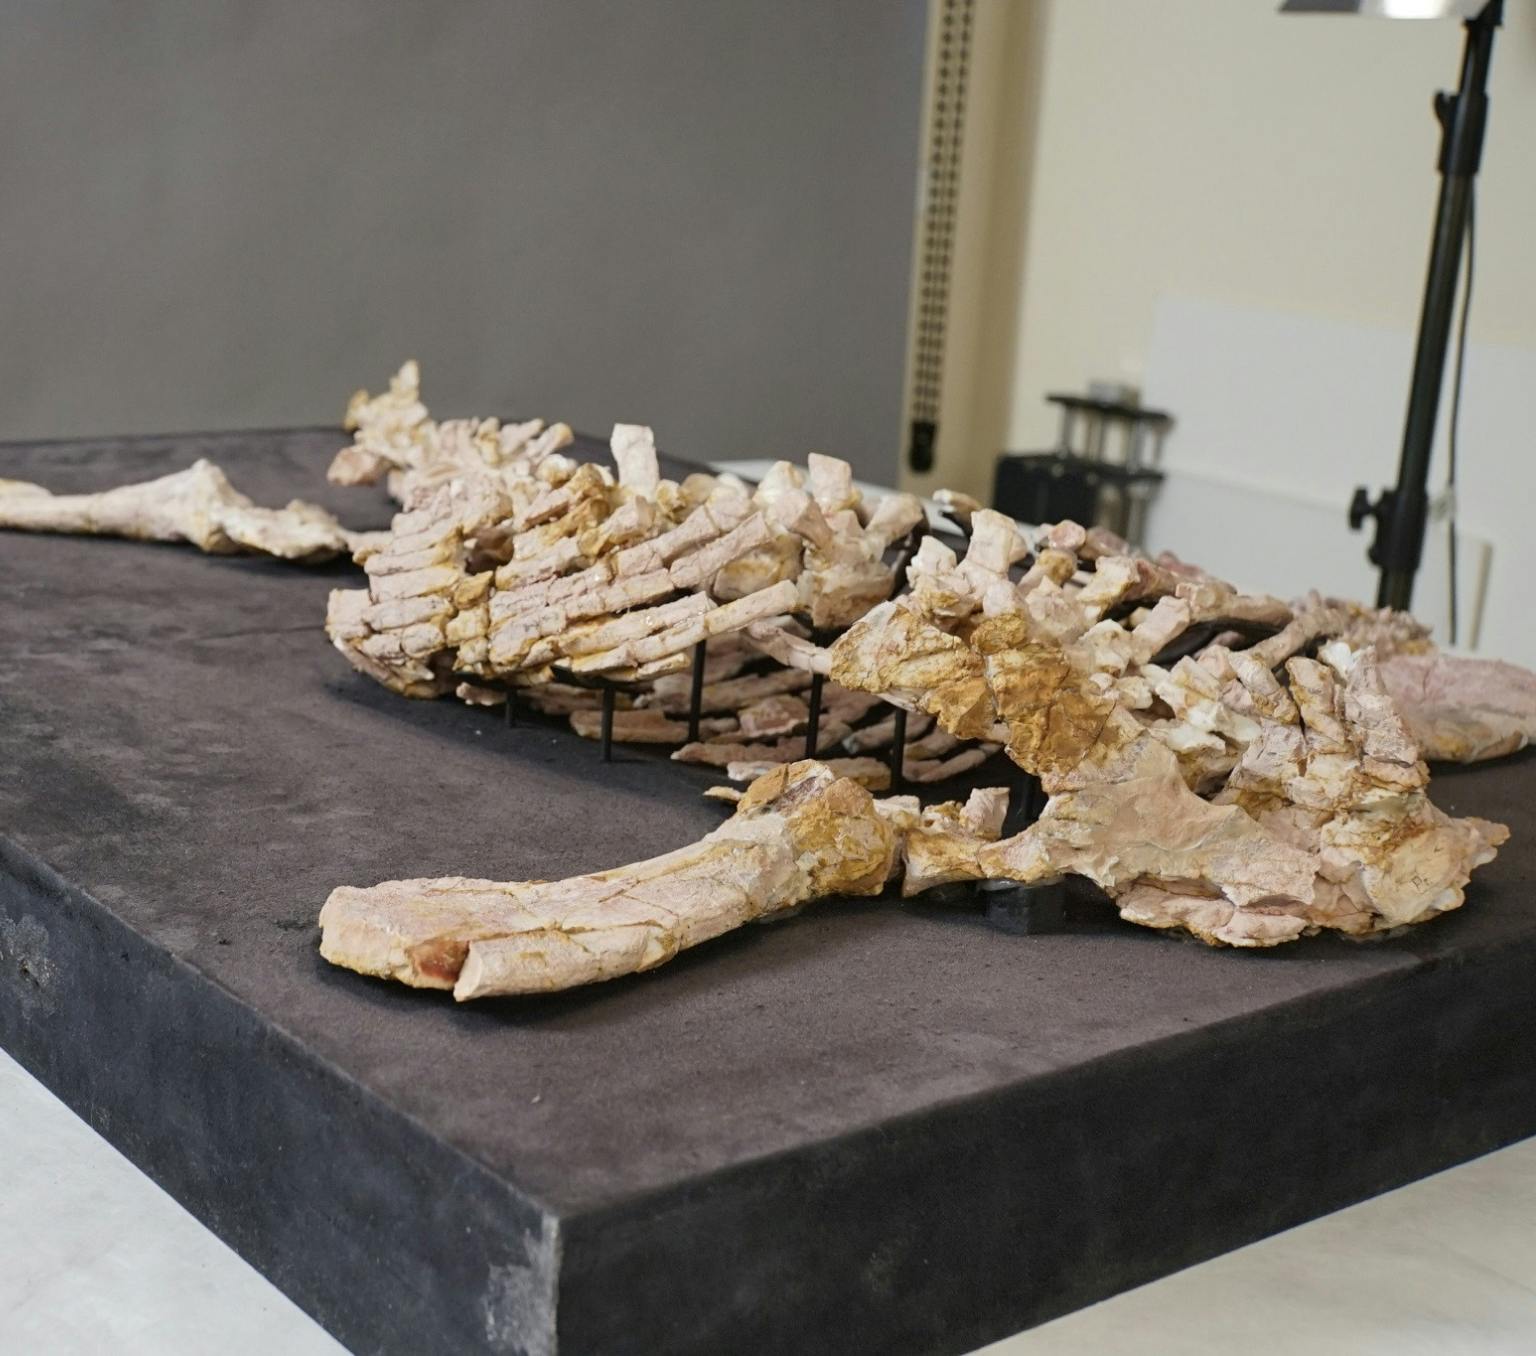 The opalised skeleton of Eric the plesiosaur on a table on display at the Australian Museum in Sydney